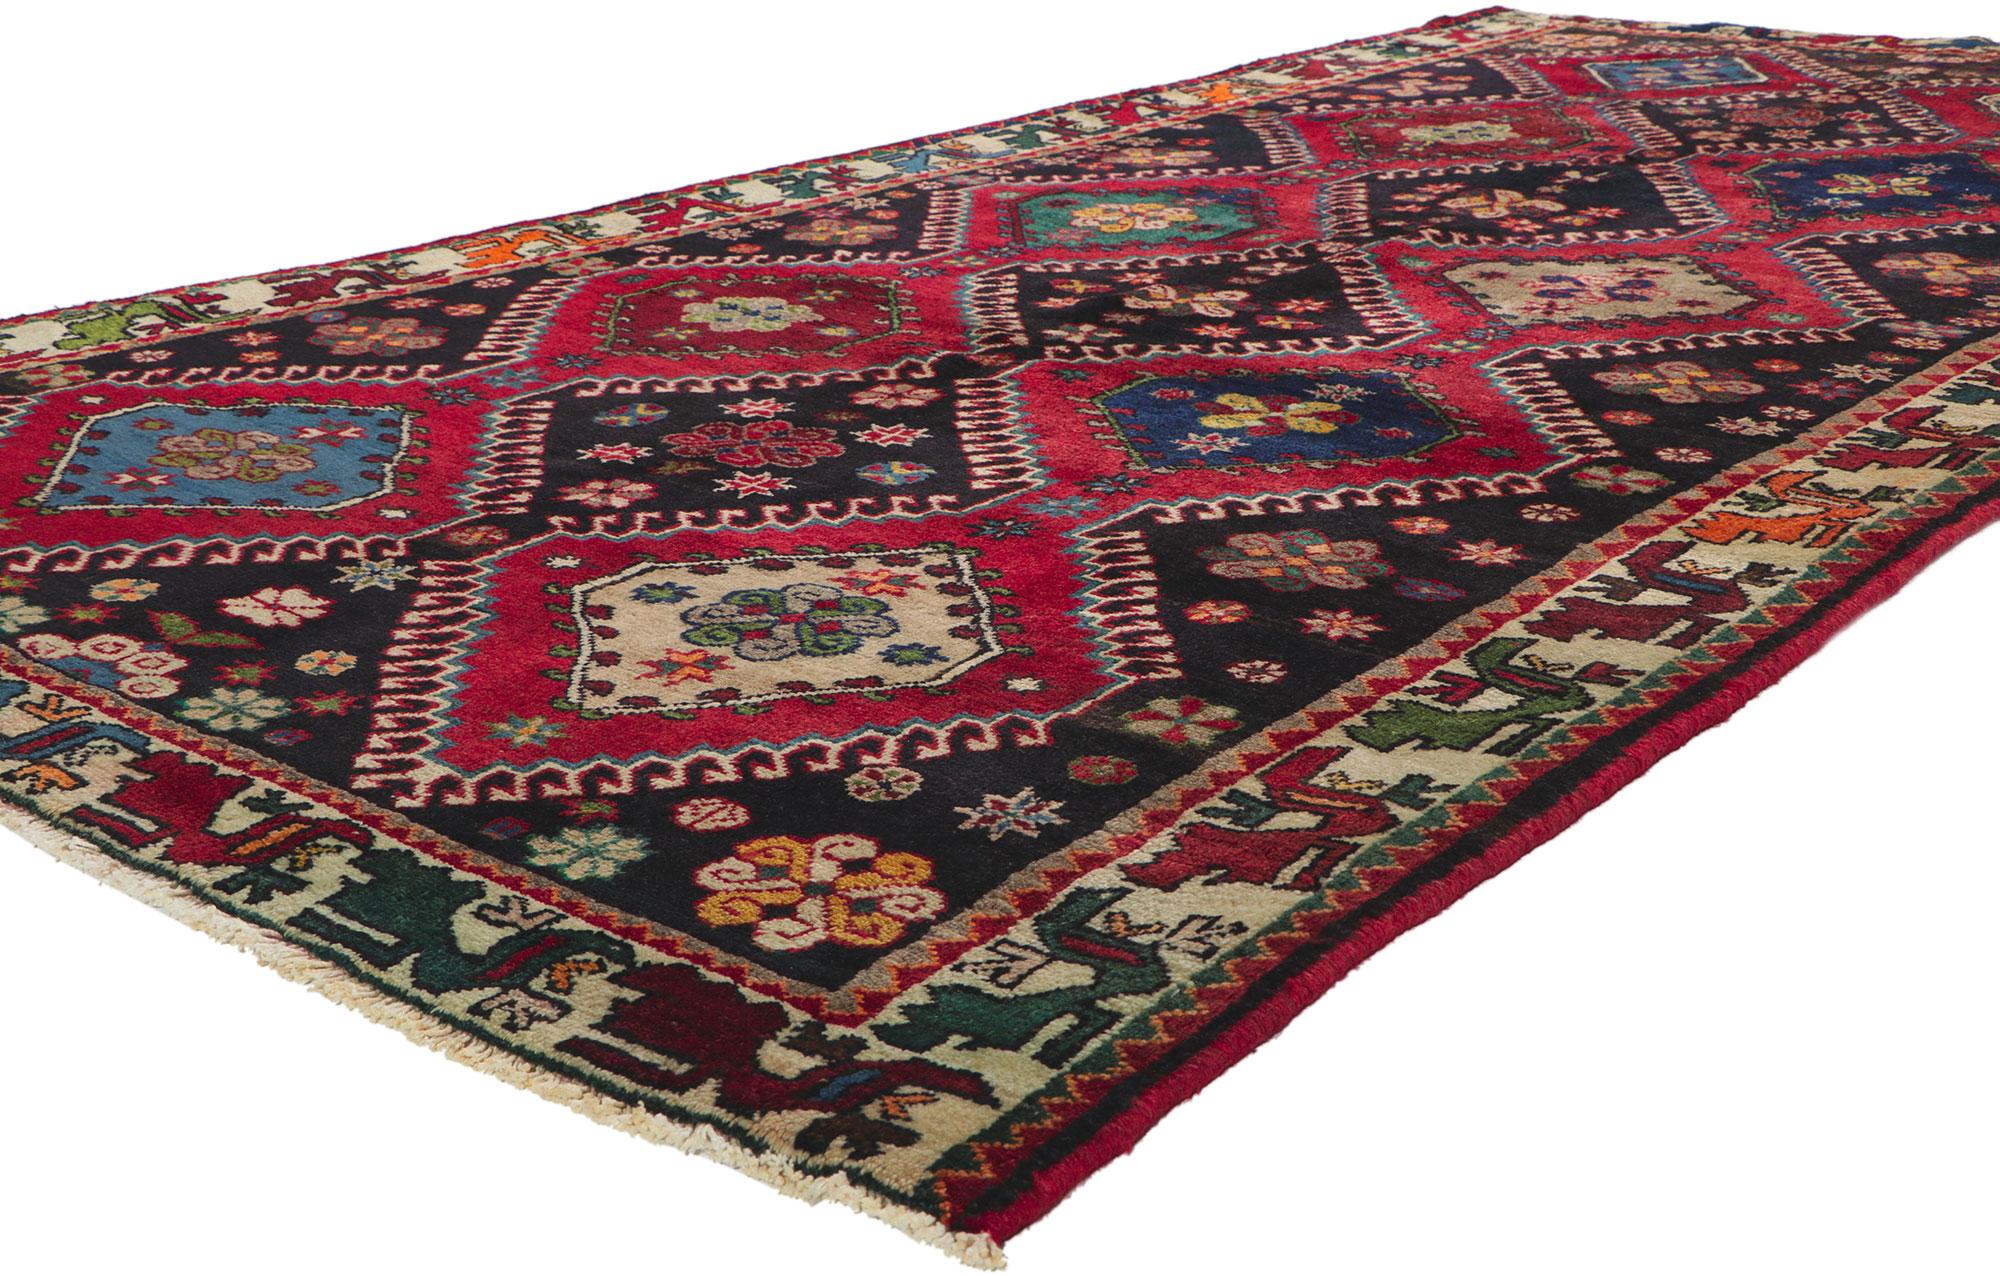 61038 Vintage Persian Shiraz Rug, 05'02 x 09'11. A ruggedly enchanting tale unfolds in the embrace of this hand-knotted wool vintage Persian Shiraz rug. Imagine the cozy nomad, weaving tribal enchantment into every thread. The lozenge lattice, a